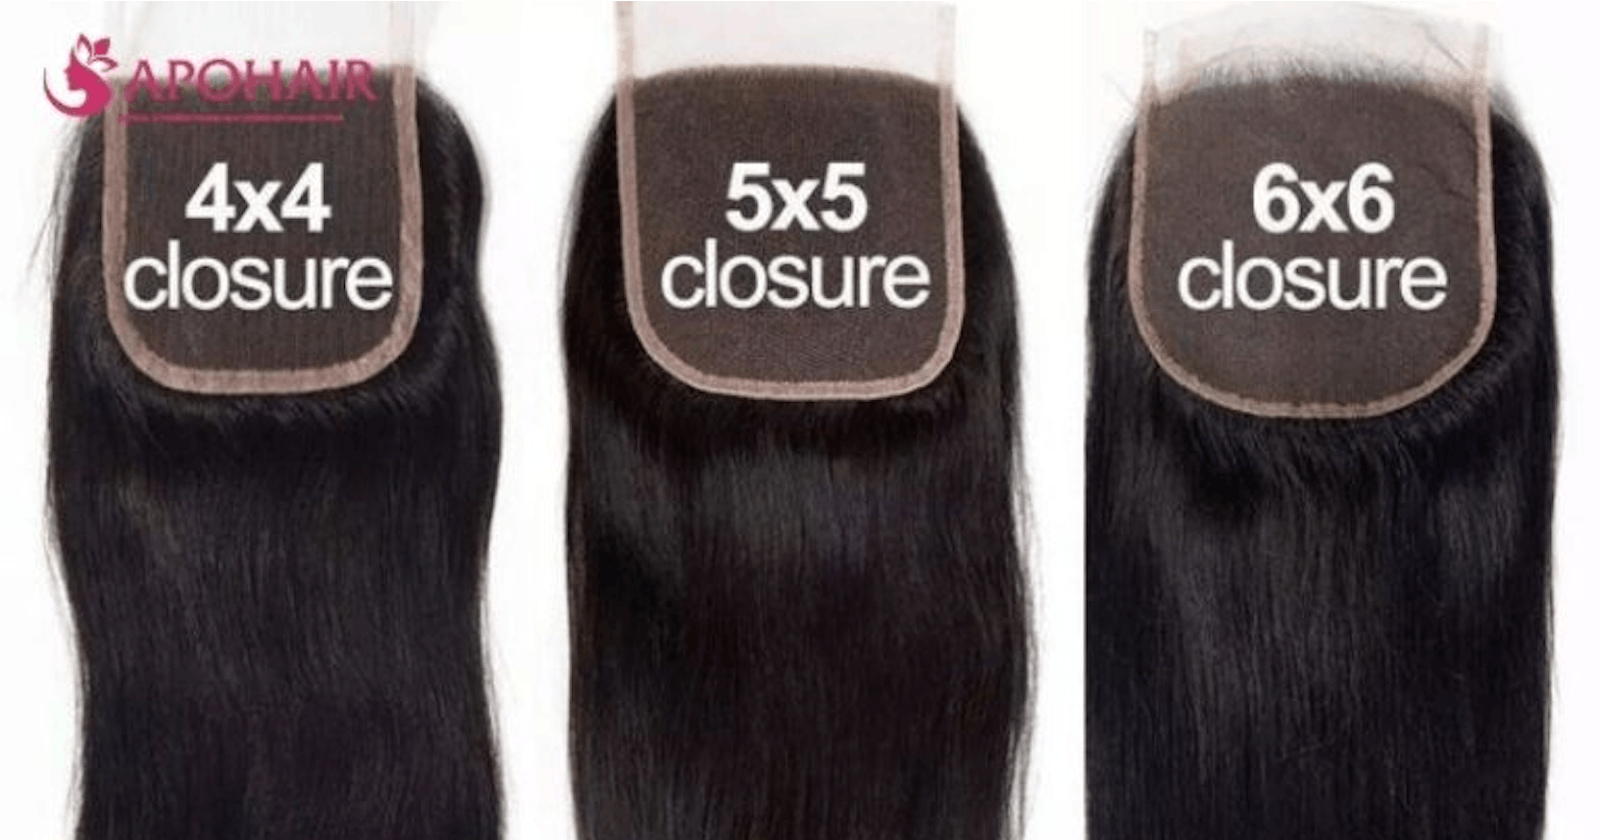 4×4 Closure vs 5×5 Closure: Which One Is Better For You?